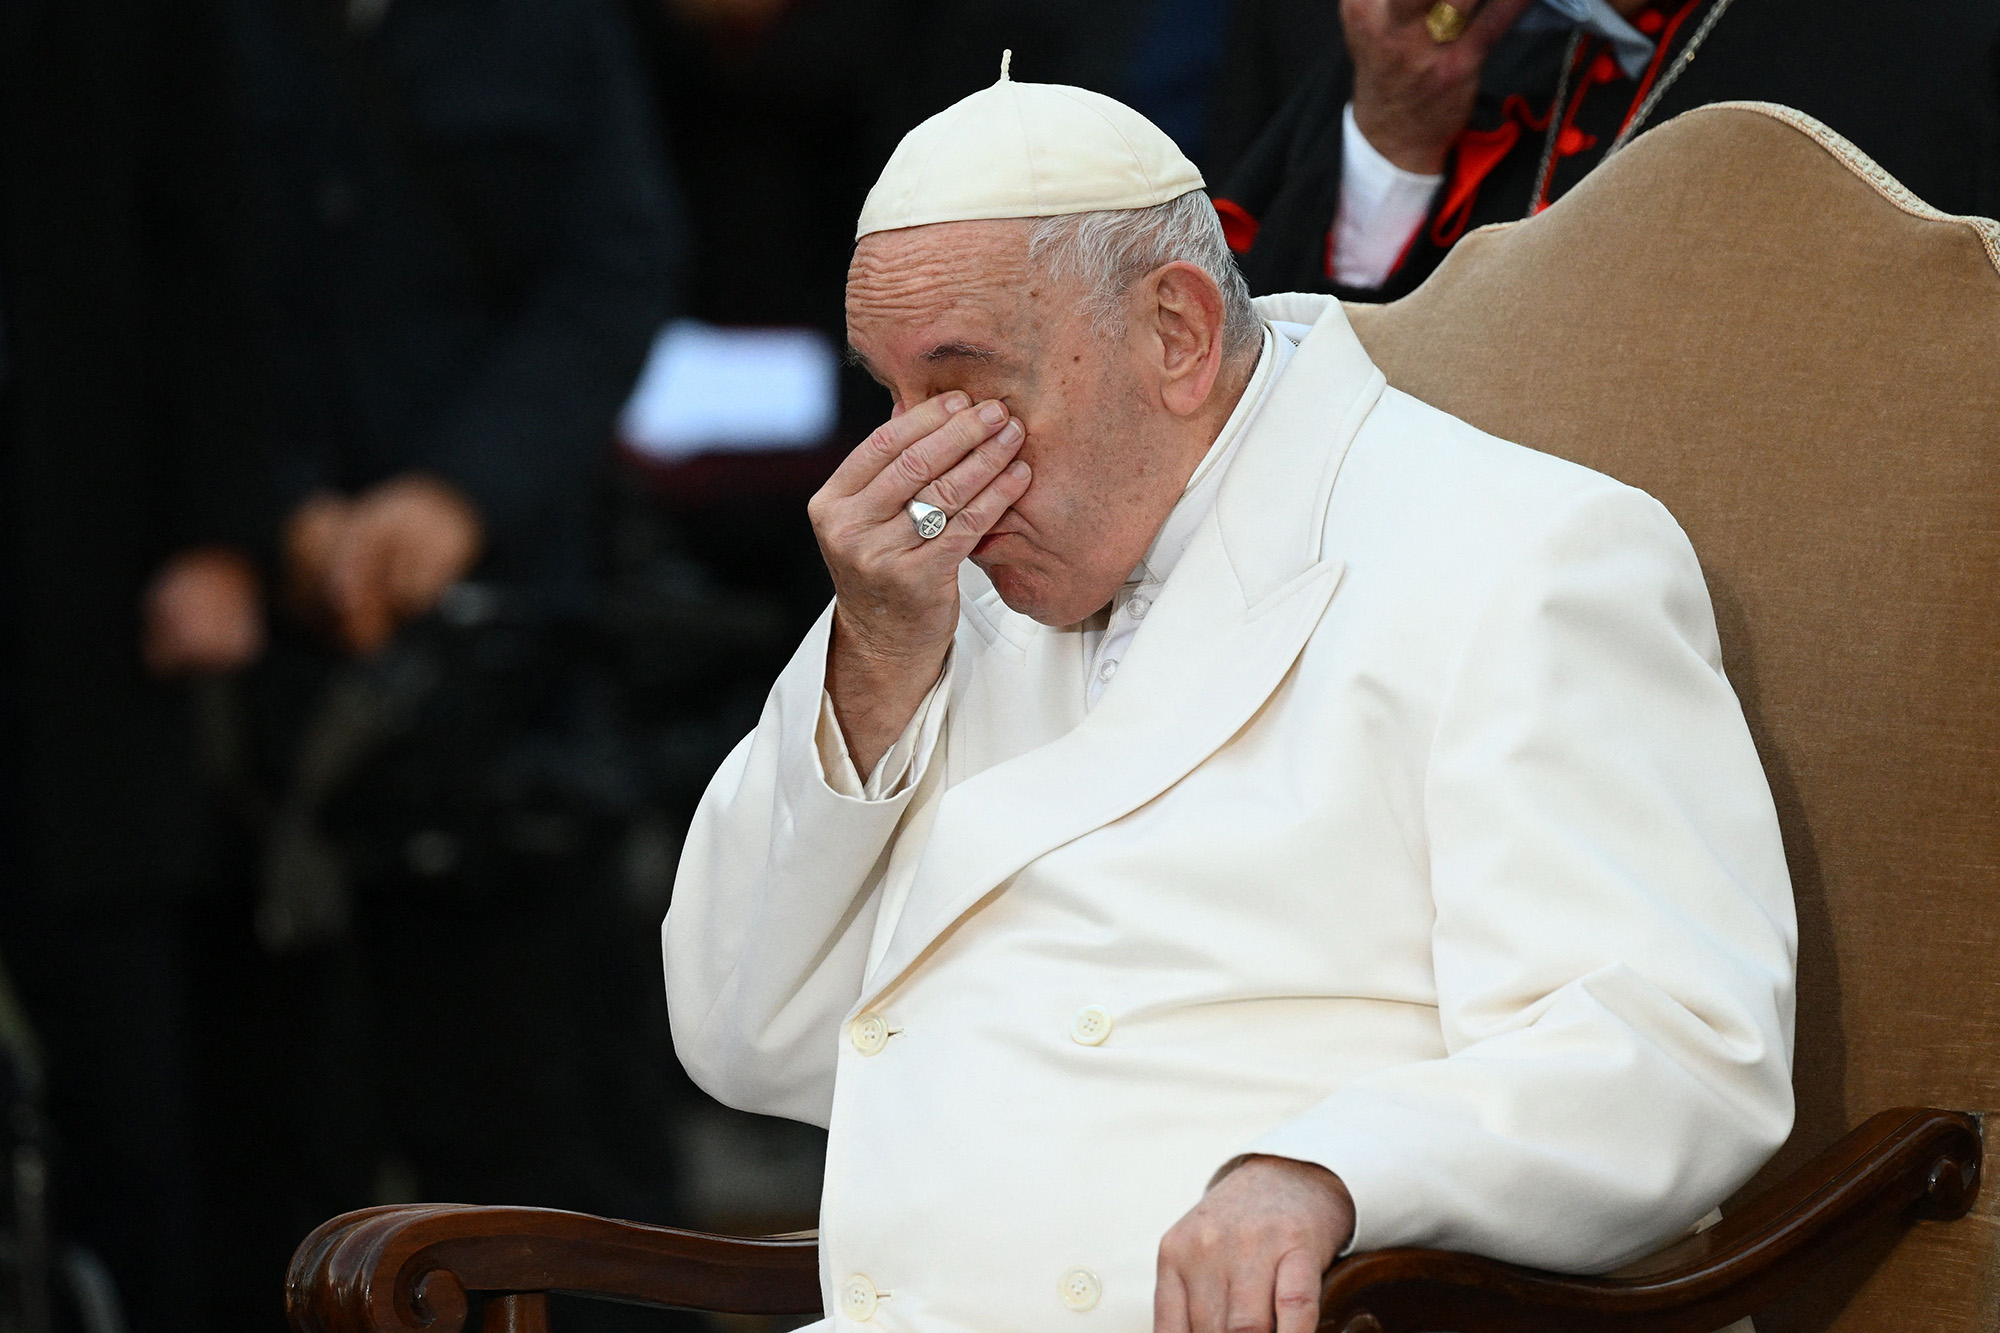 Pope Francis is emotional after he recited a prayer on behalf of the Ukrainian people, during a traditional visit to the statue dedicated to the Immaculate Conception near Piazza di Spagna in central Rome, Italy, on December 8.